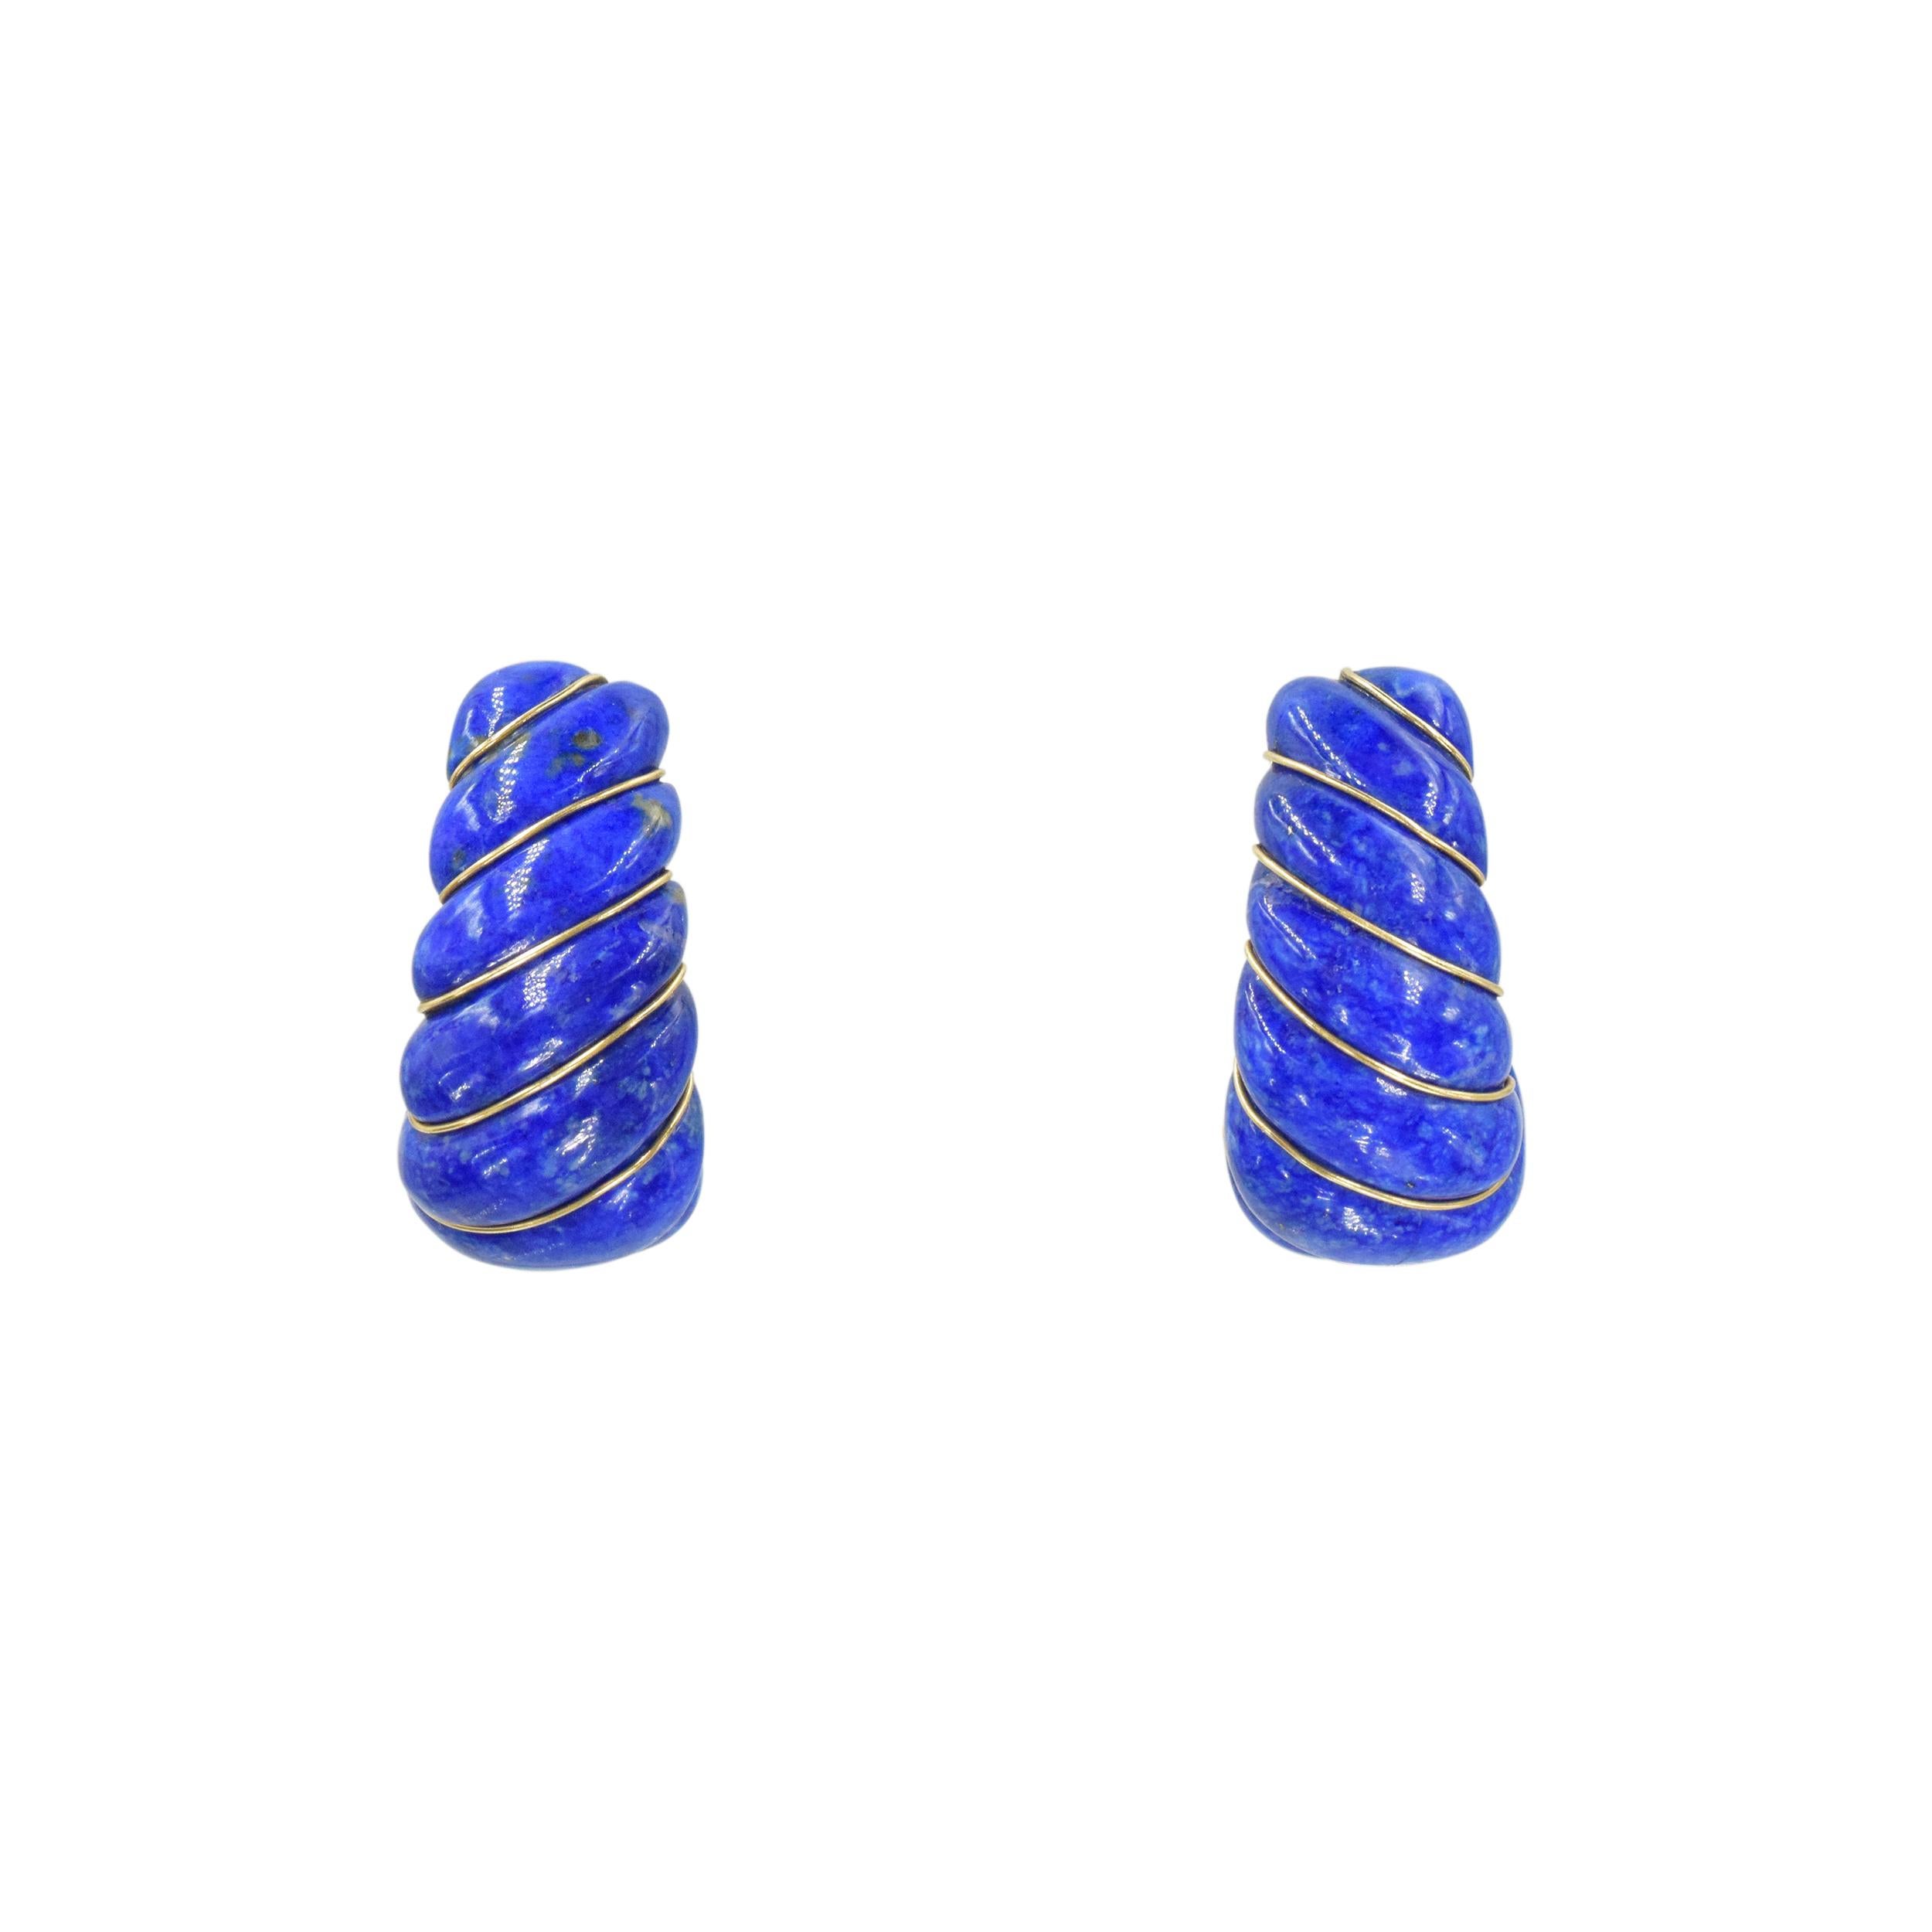 Van Cleef & Arpels lapis lazuli and 18k yellow gold shrimp style earclips. This
pair of earrings consisit of ribbed lapis lazuli accented with 18k gold wire placed between the grooves. Equipped with omega back clip. Inscribed: VCA, Serial No,.